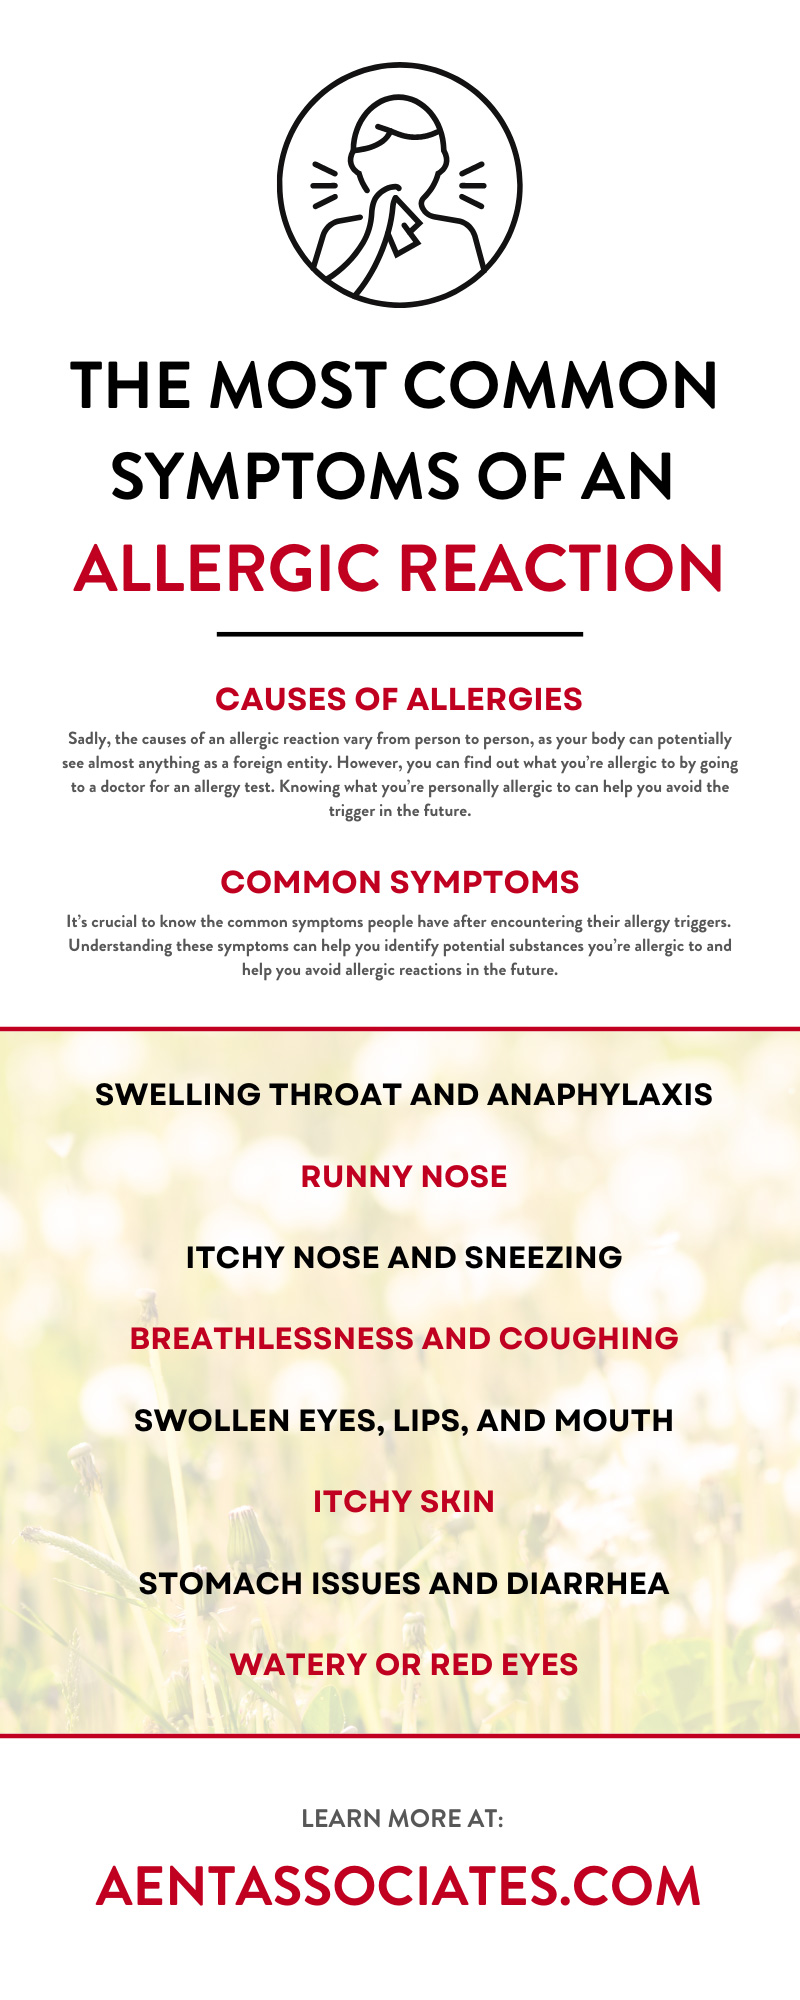 The Most Common Symptoms of an Allergic Reaction 